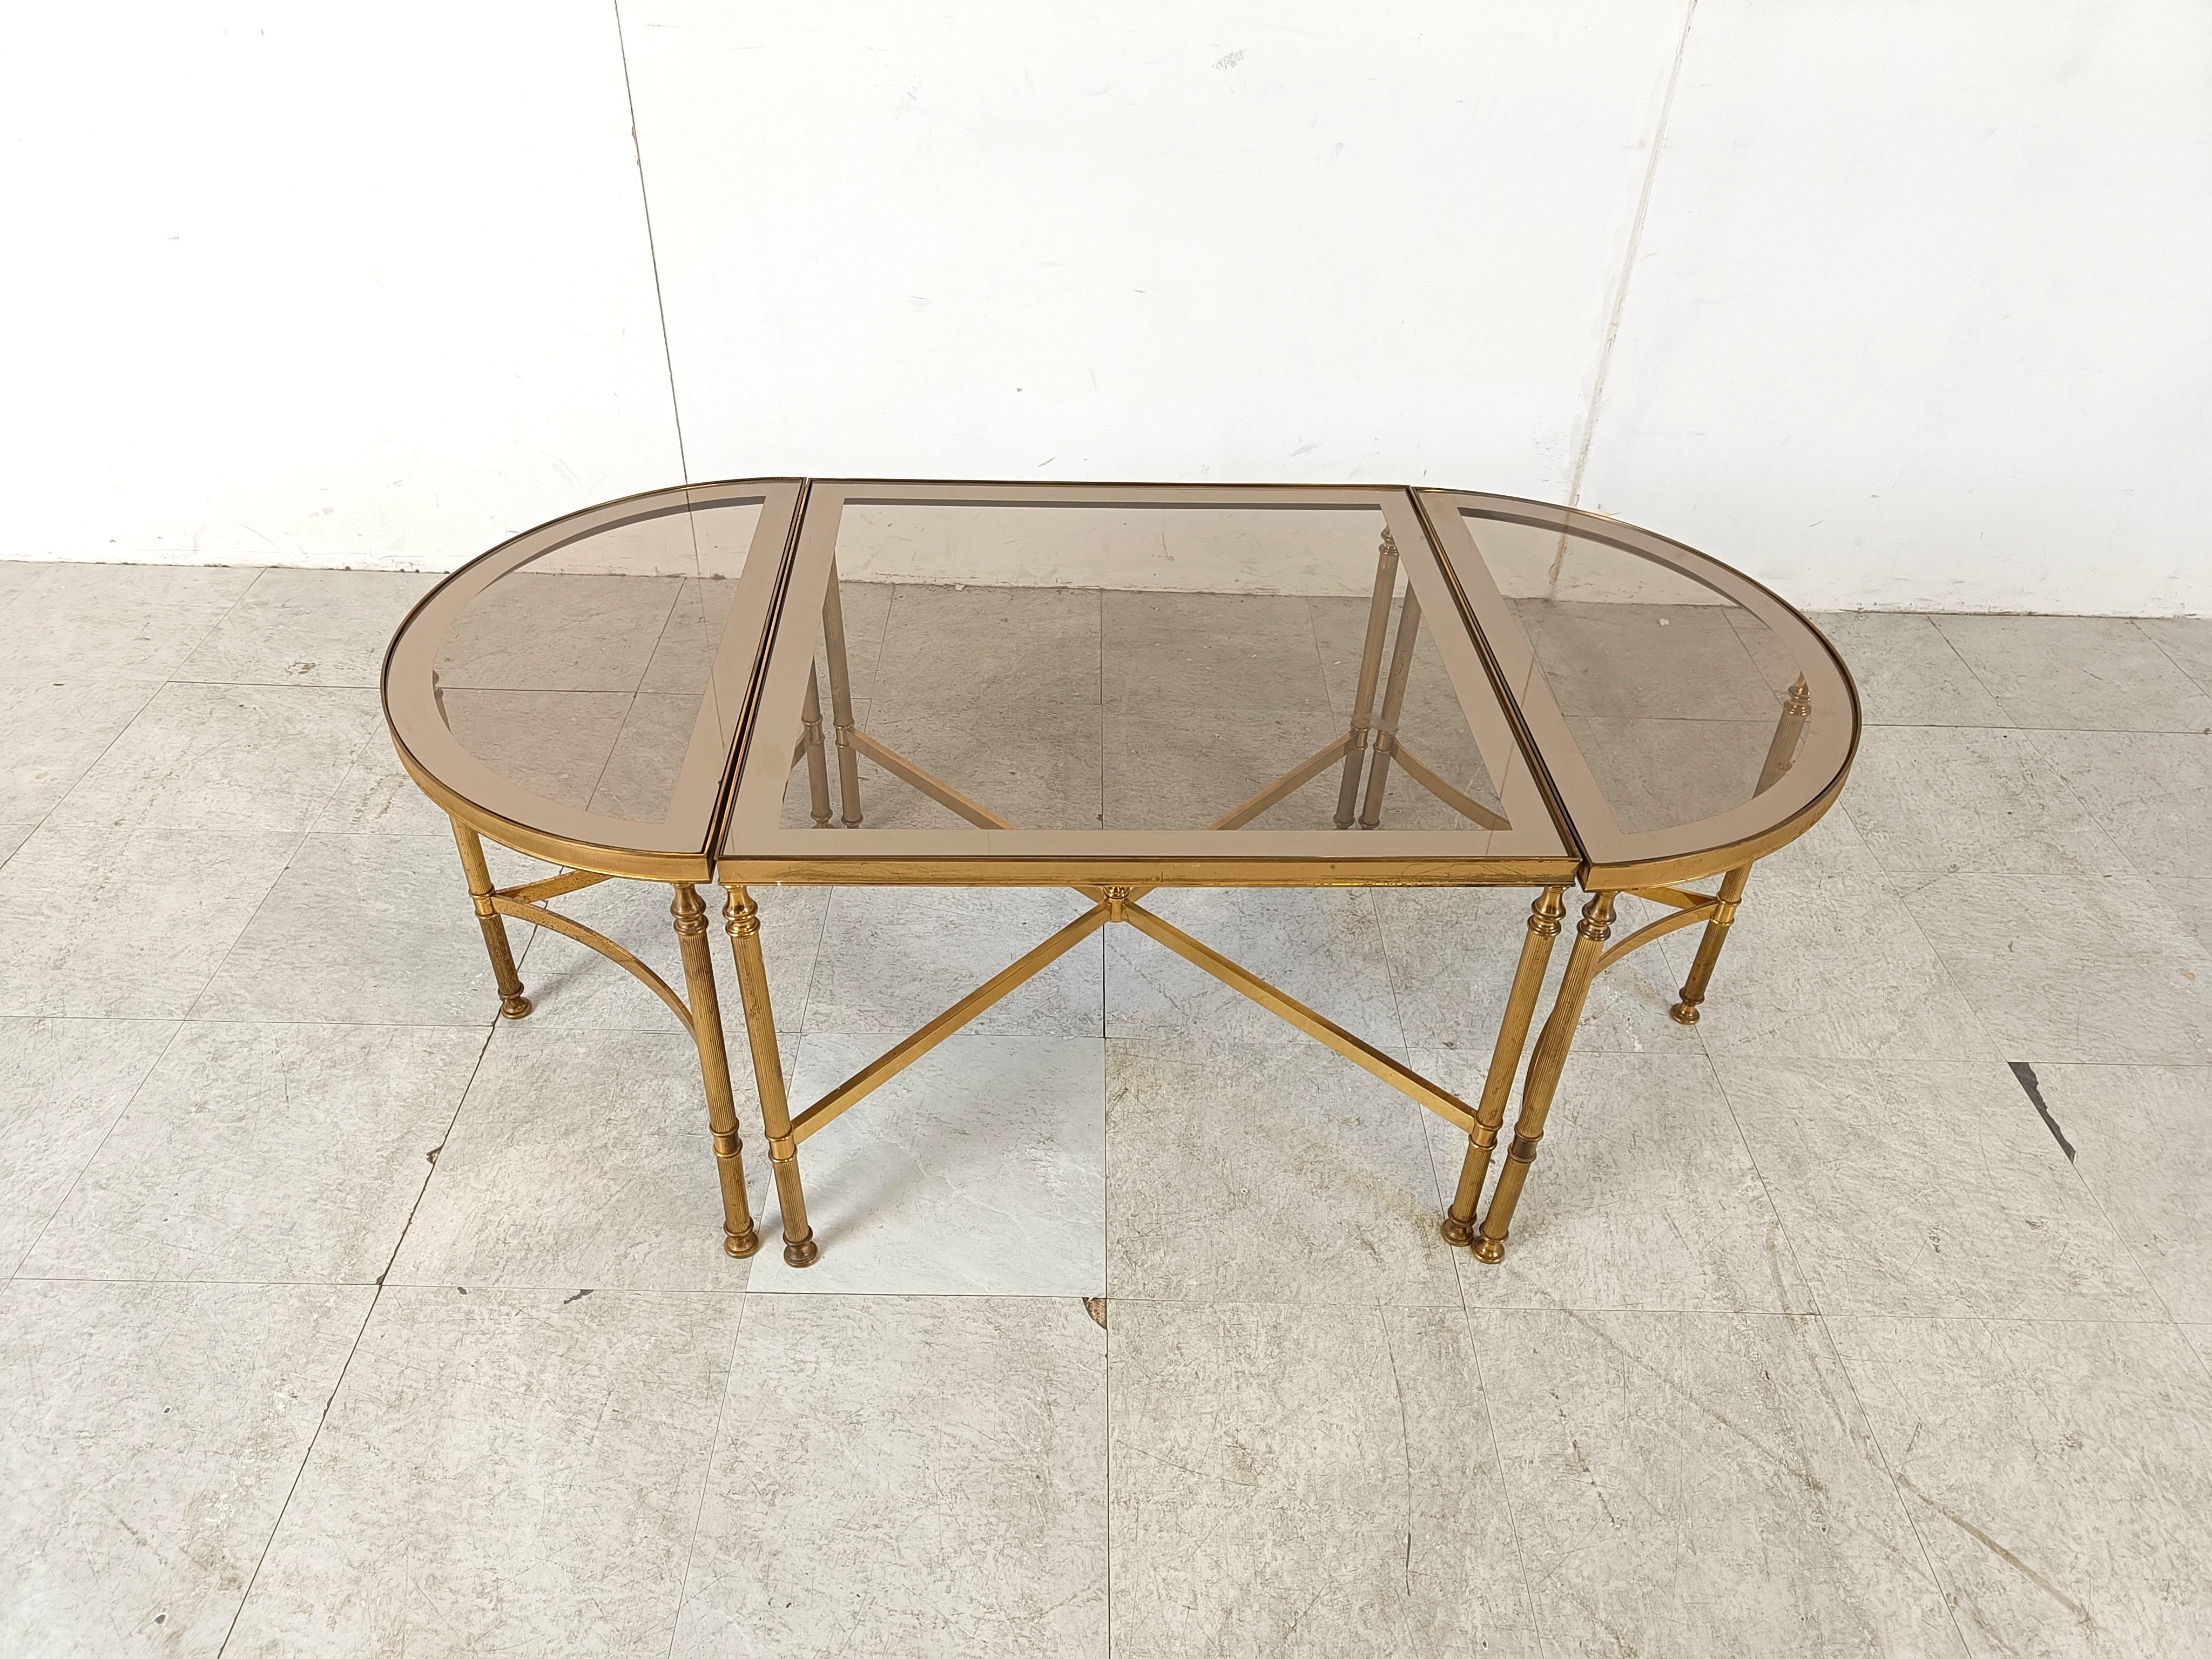 Neoclassical coffee table set consisting of three tables with a gilt metal frame and smoked glass top with mirrored edges in the manner of Maison Jansen.

Playful design with the bent metal between the legs.

The two side tables can be used